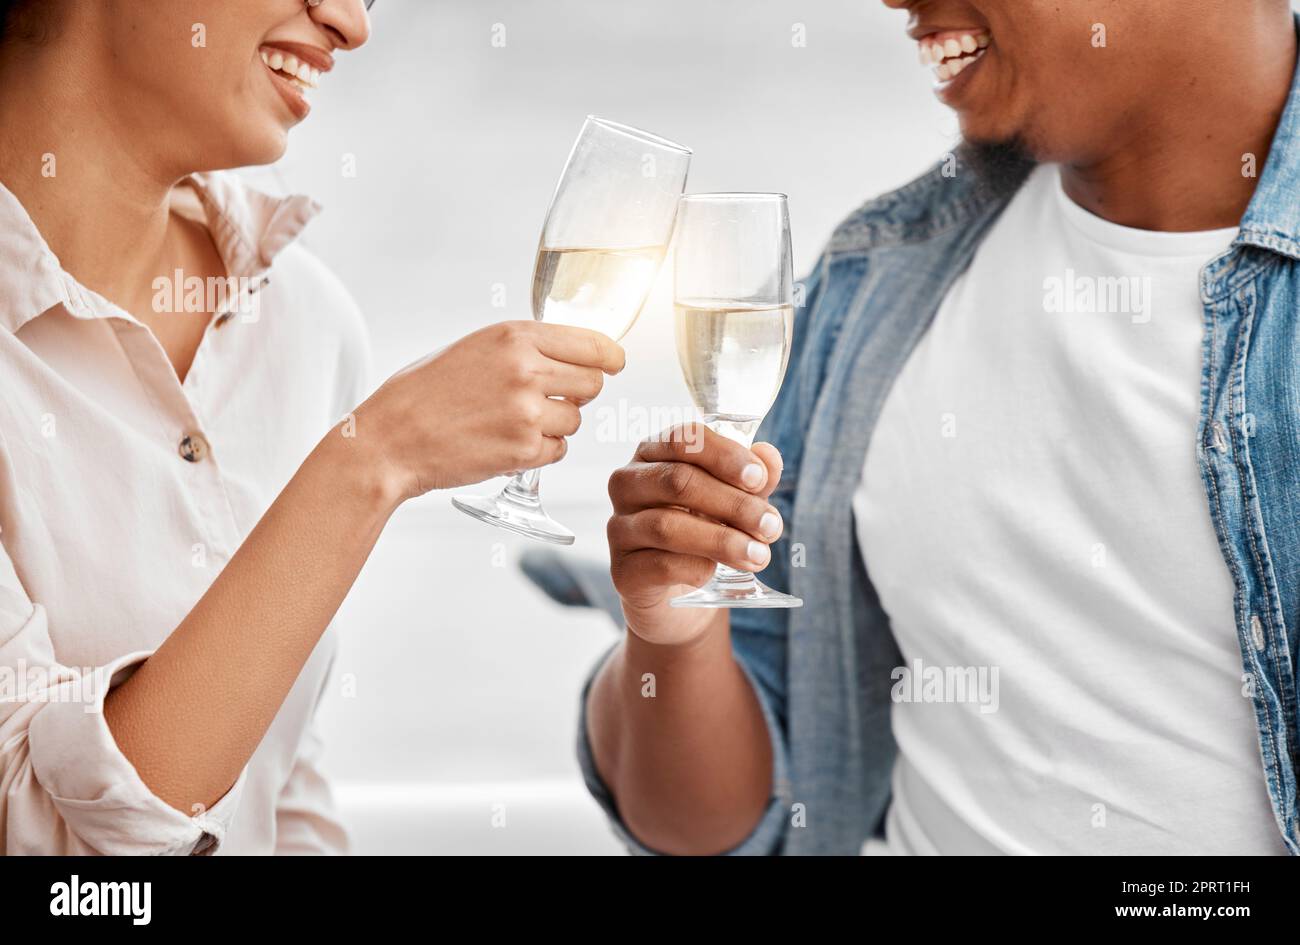 Celebrate, toast and couple with champagne for anniversary, date or luxury travel vacation together. Love, cheers and happy hands of man and woman holding glass of wine for joy, drink and event Stock Photo